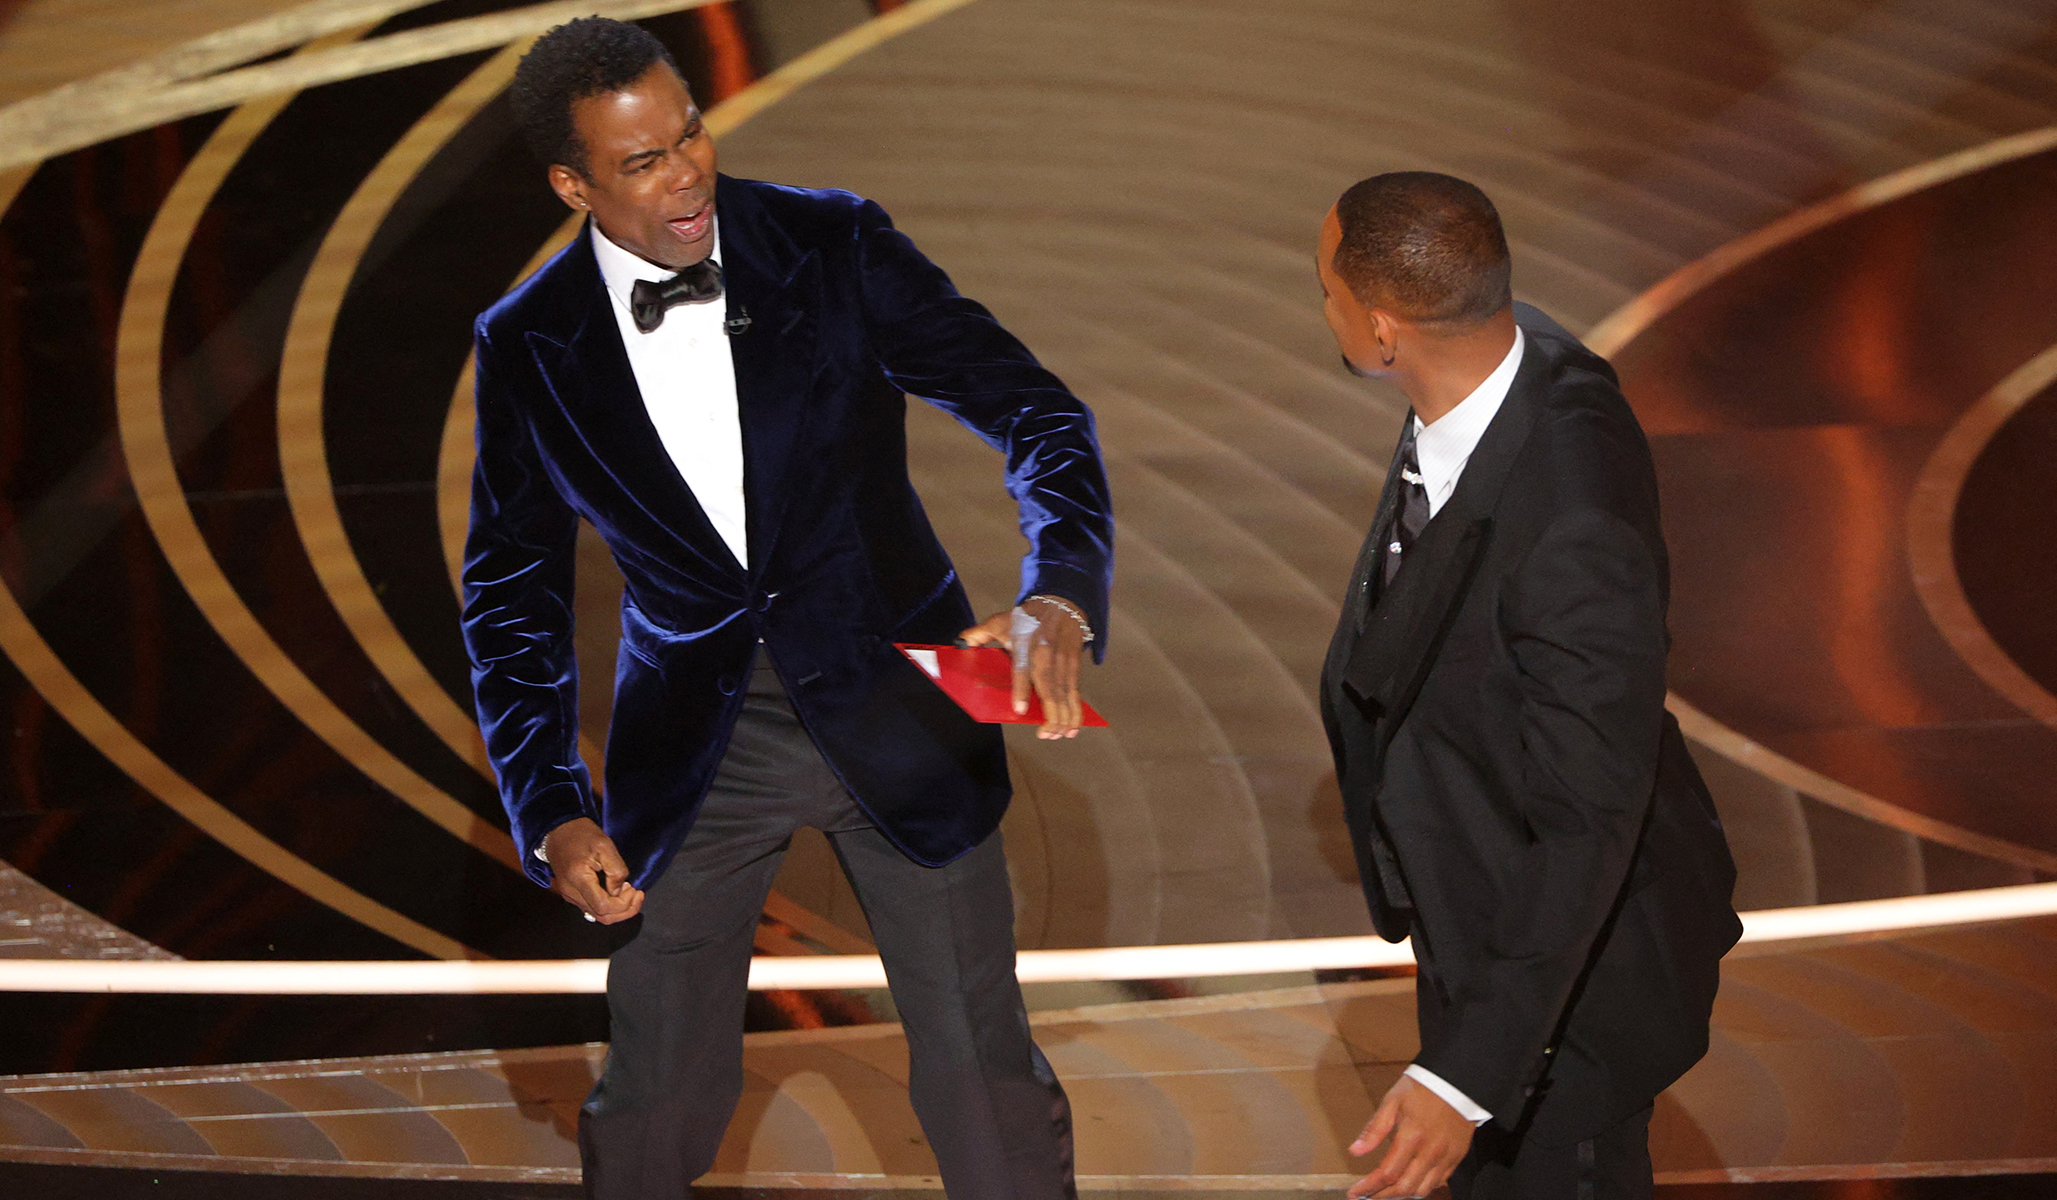 Chris Rock vs. Will Smith Who Won the Oscars? National Review